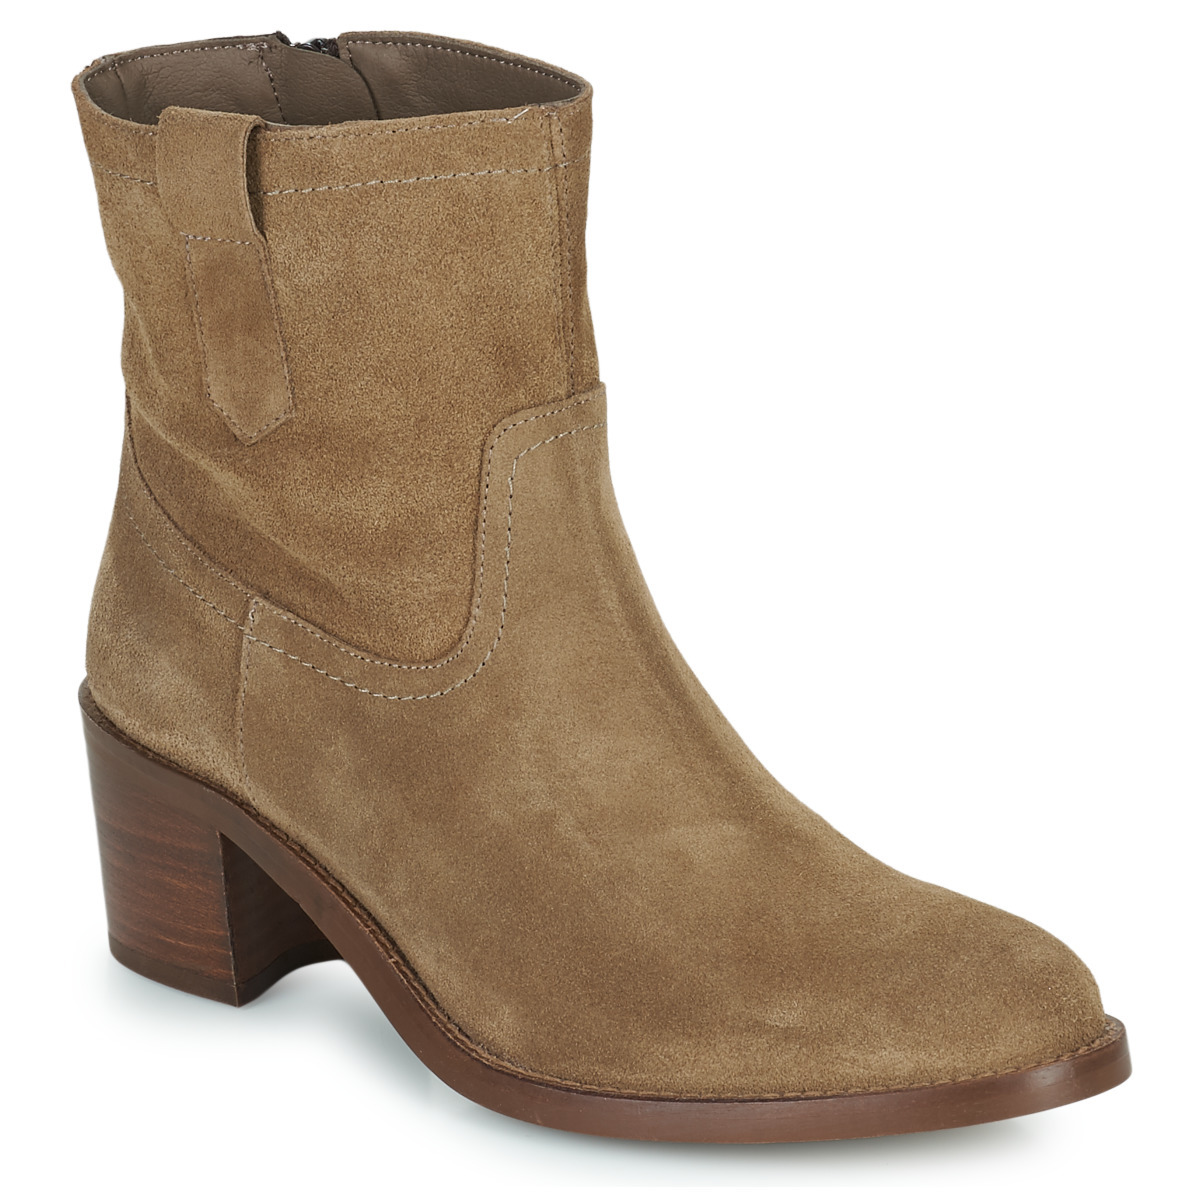 Lady Beige Ankle Boots at Spartoo GOOFASH